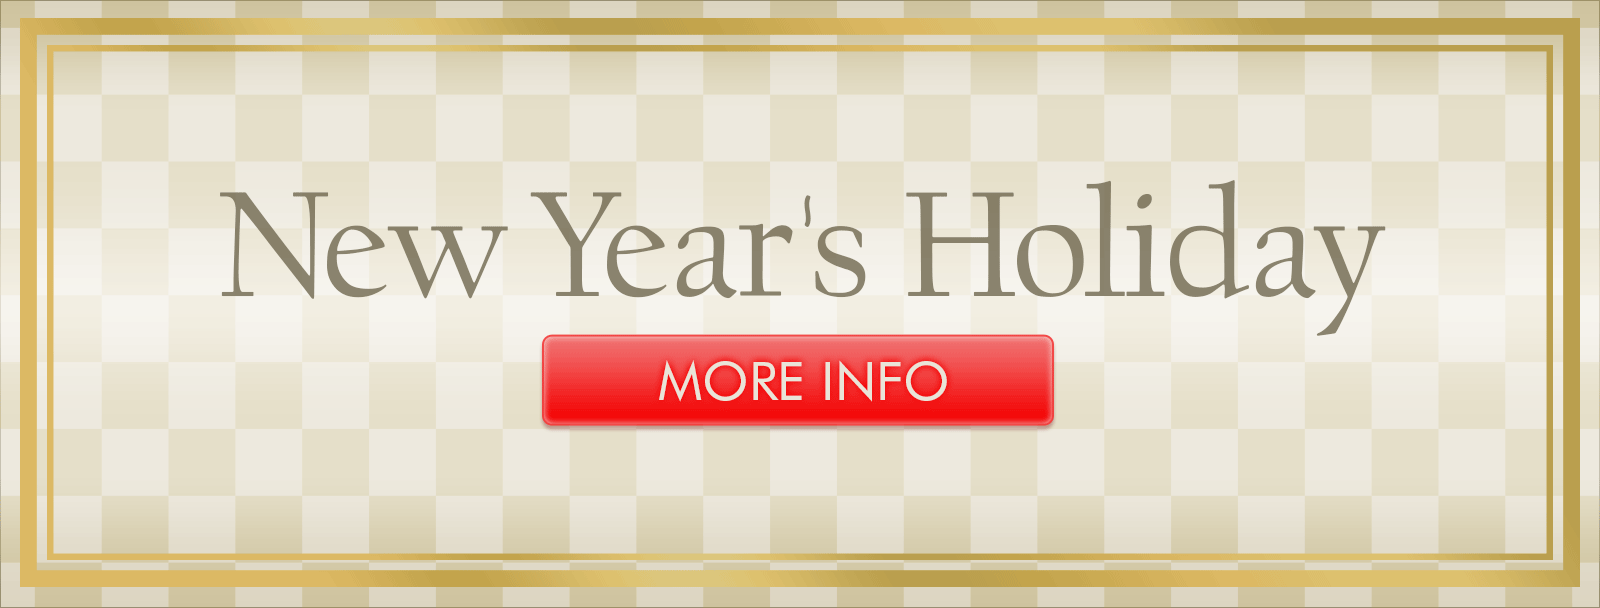 Announcement of New Year's Holidays